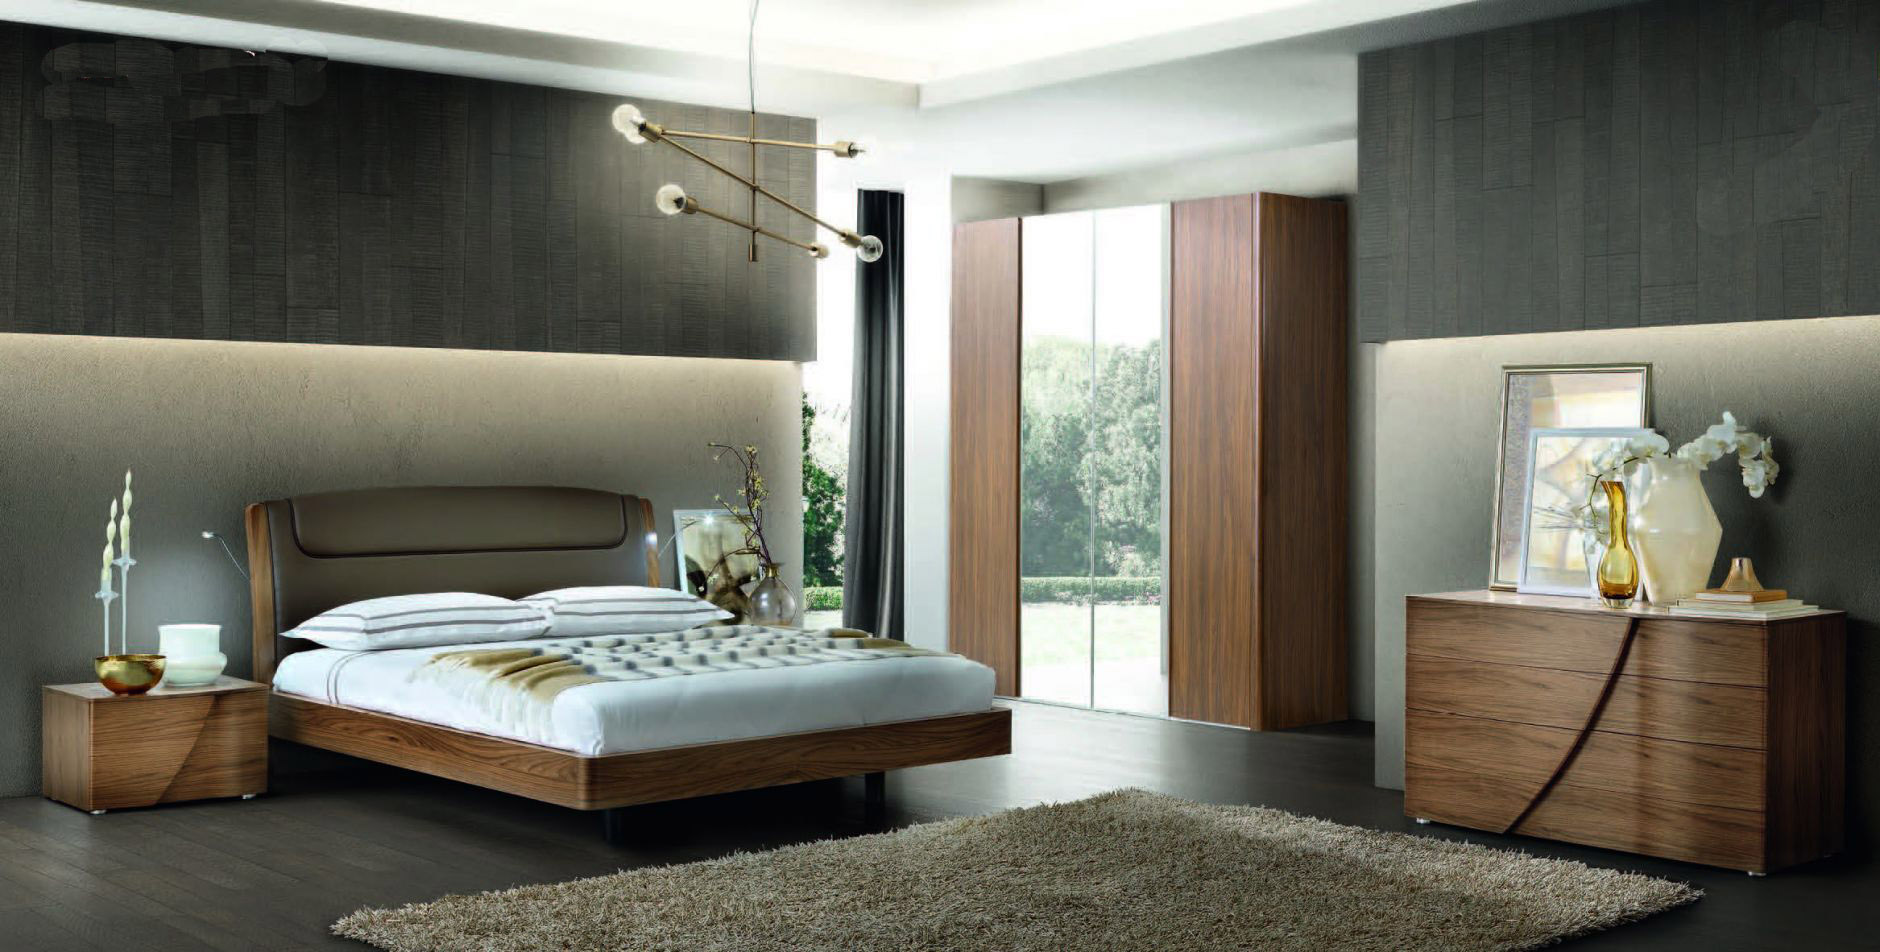 Made In Italy Leather Luxury Bedroom, Bedroom Set With Leather Headboard